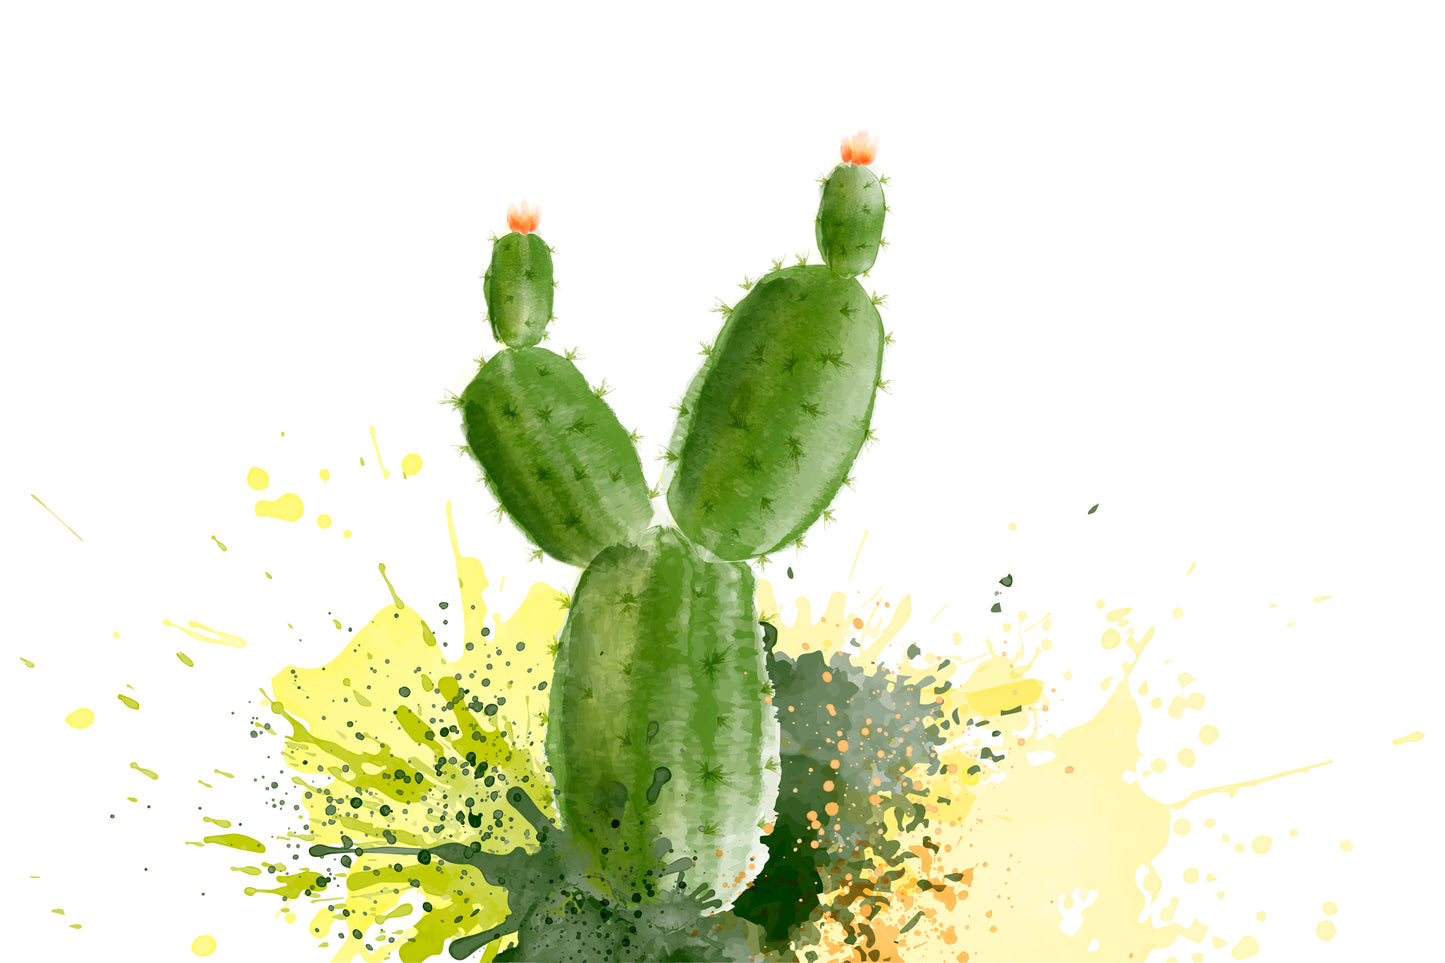 Cactus Image and 28 Vector Watercolor Brushes